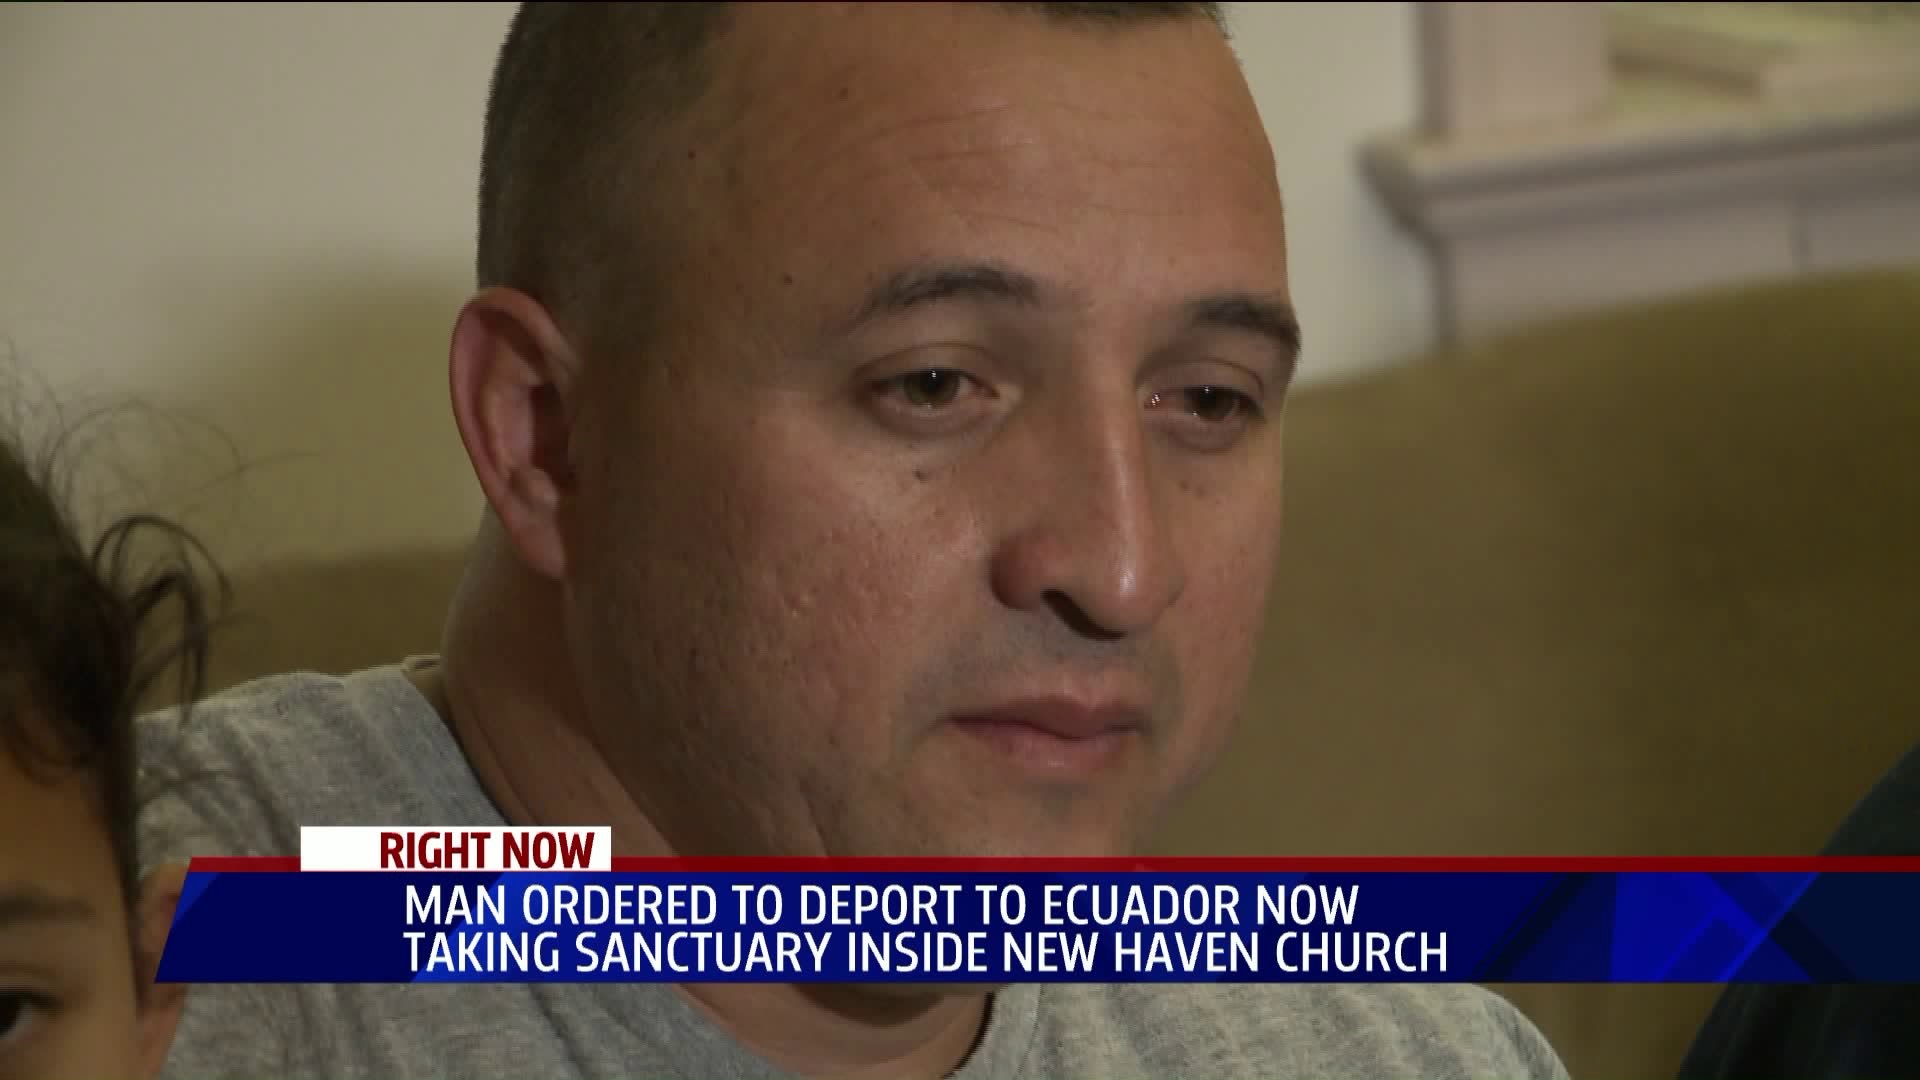 Man facing deportation takes sanctuary in New Haven church